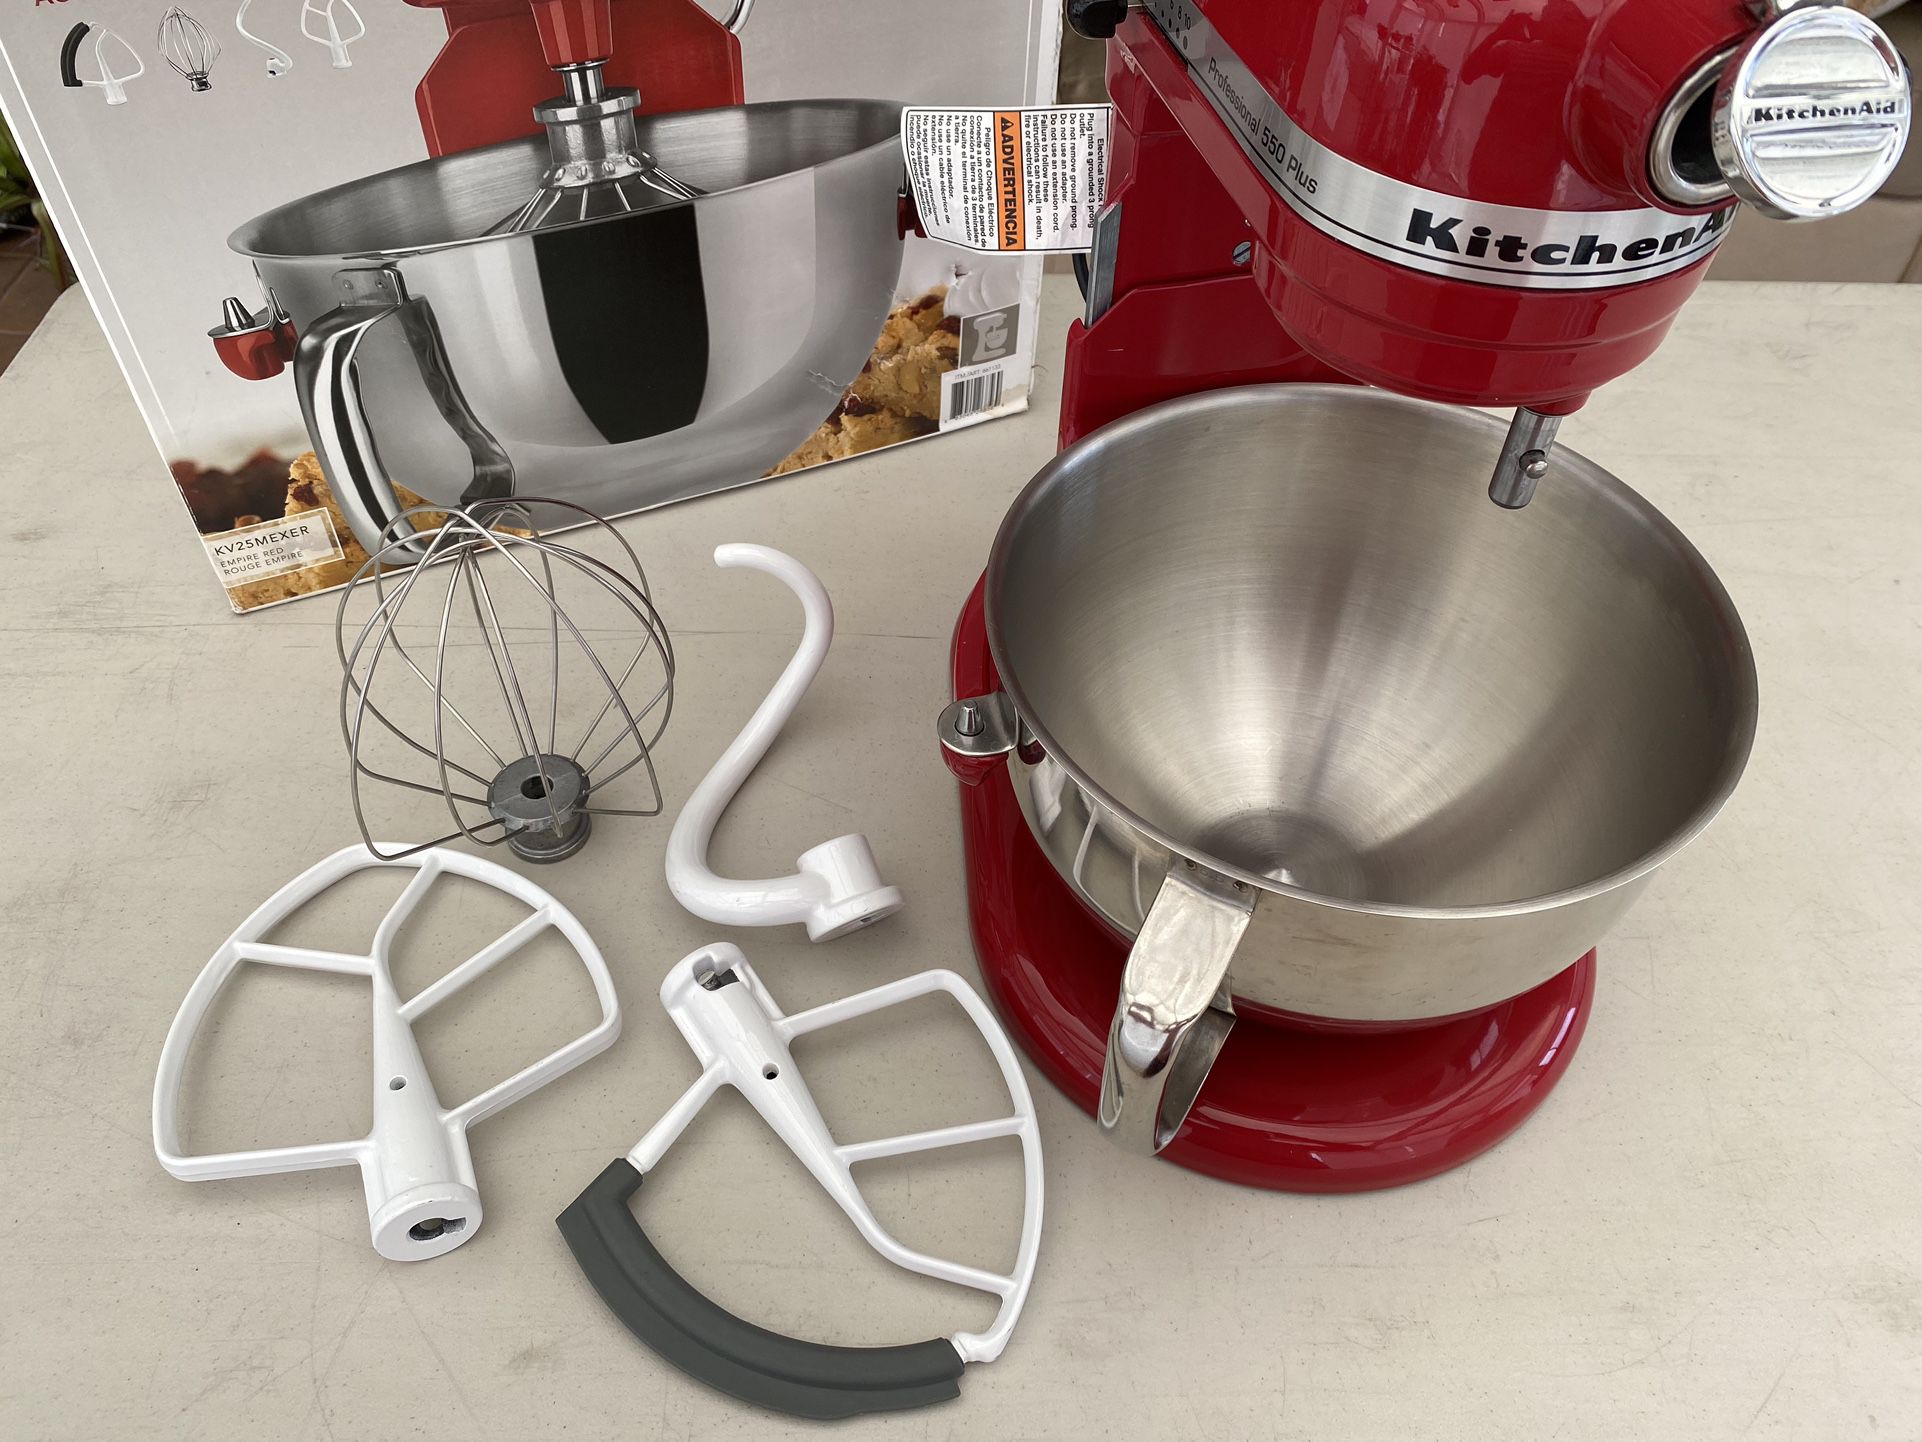 NIB Cuisinart The Stand Mixer Citrus Juicer Attachment for Sale in Melrose,  MA - OfferUp